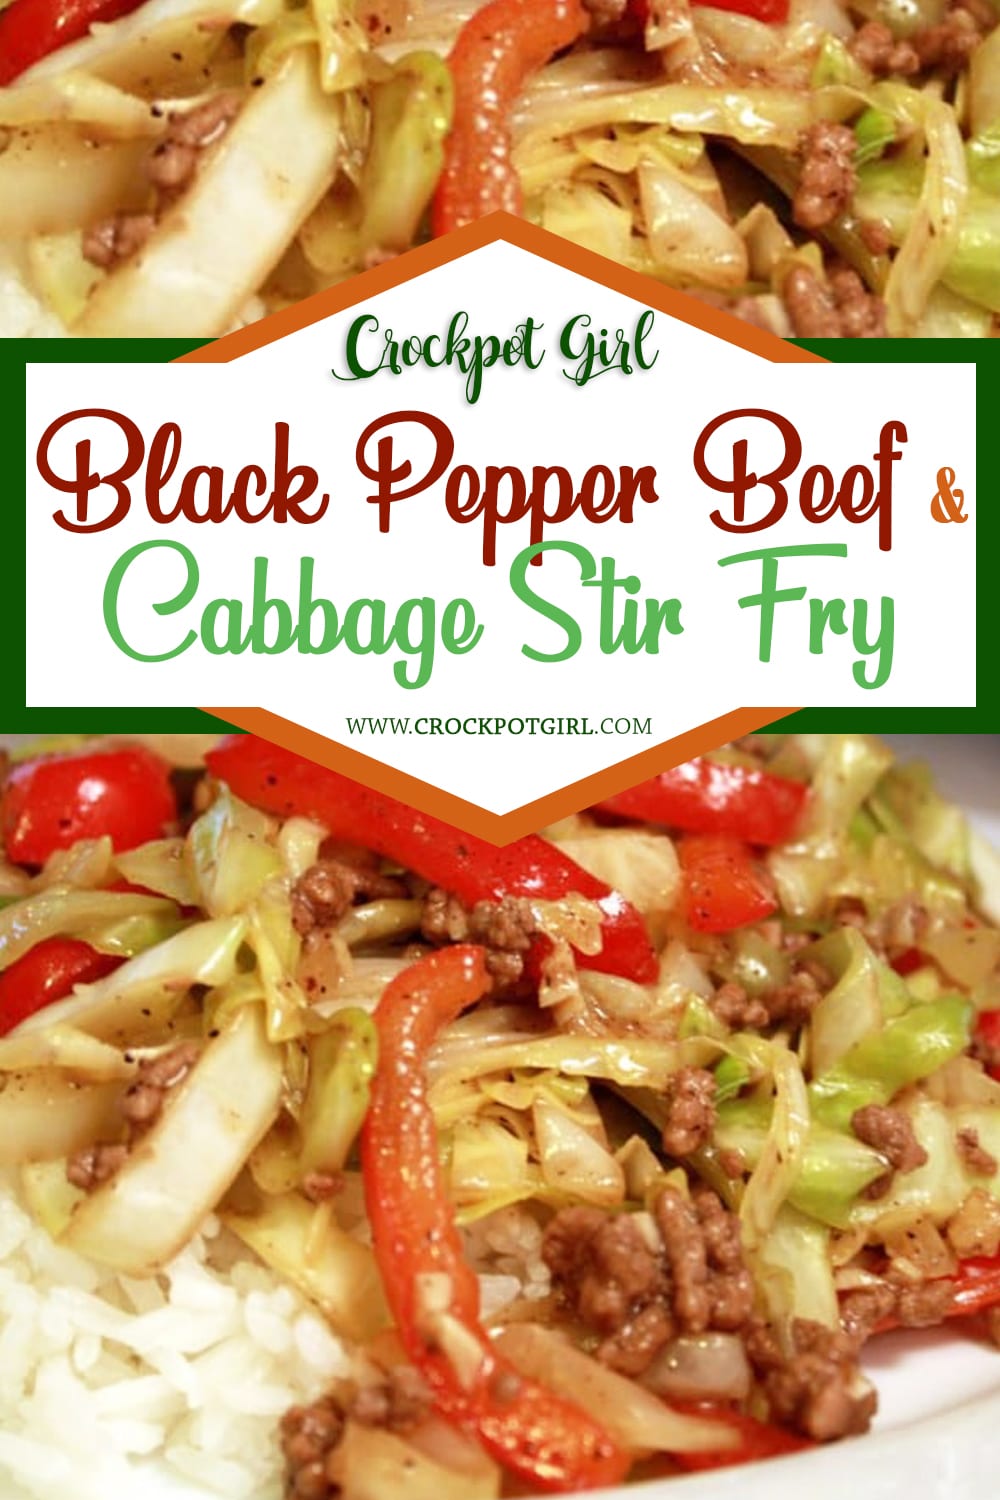 Black Pepper, Beef and Cabbage Stir Fry Recipe